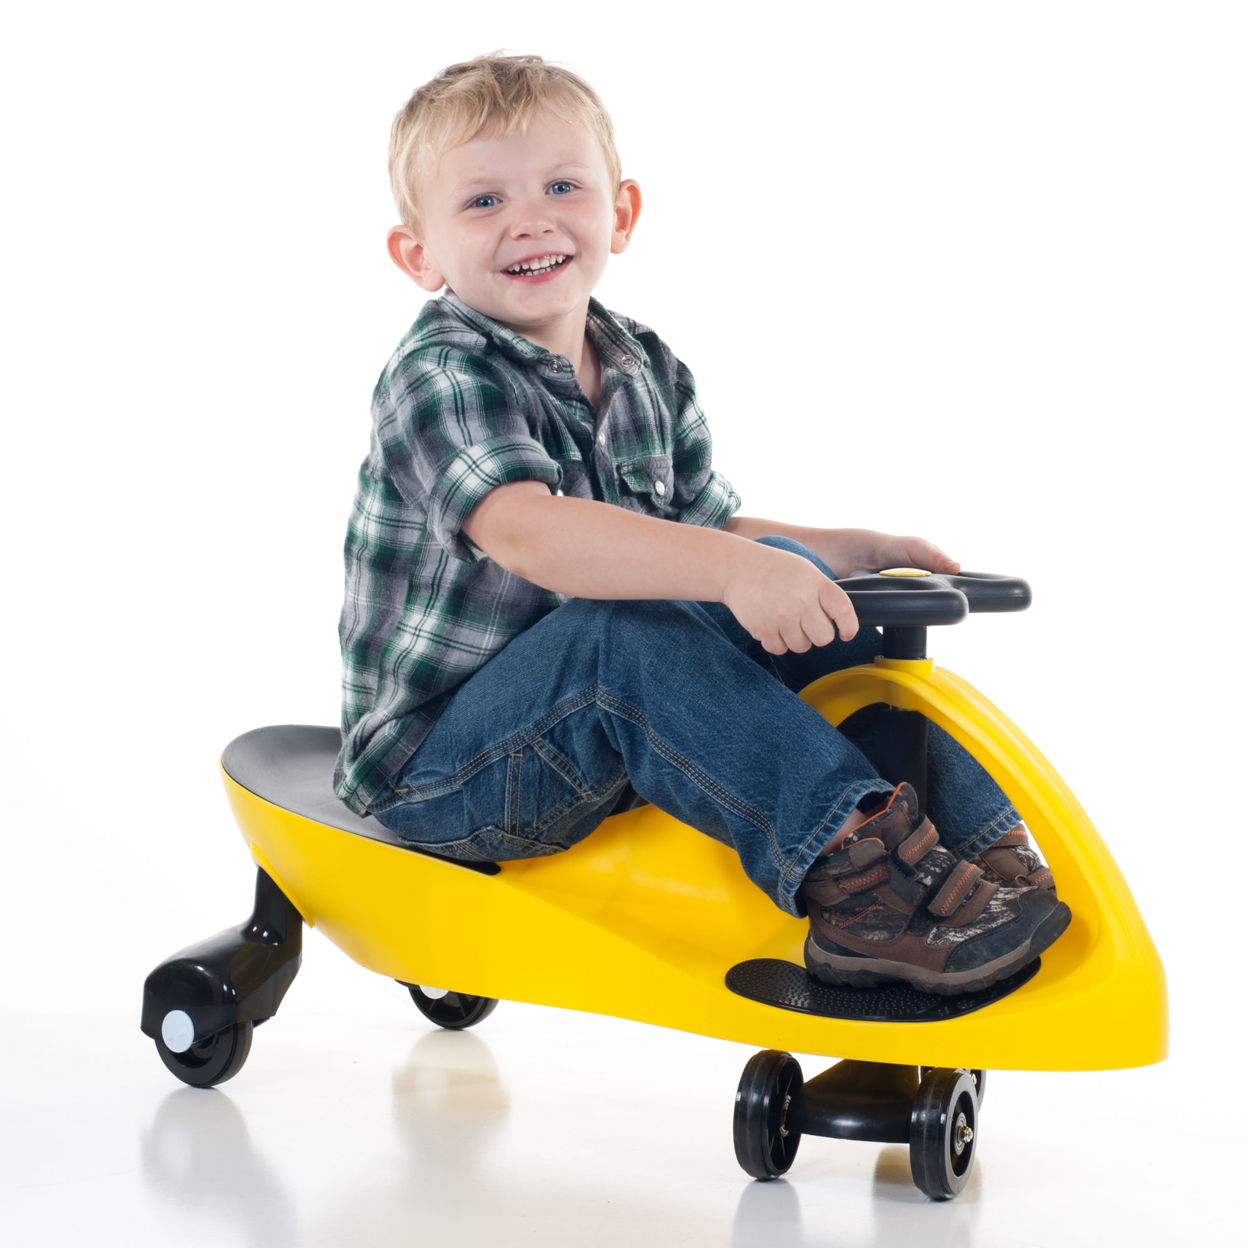 Zig Zag Wiggle Car Ride On Energy Powered Ride On Toy Roller Coaster Car Boys Girls Ages 2 - 7 - Yellow